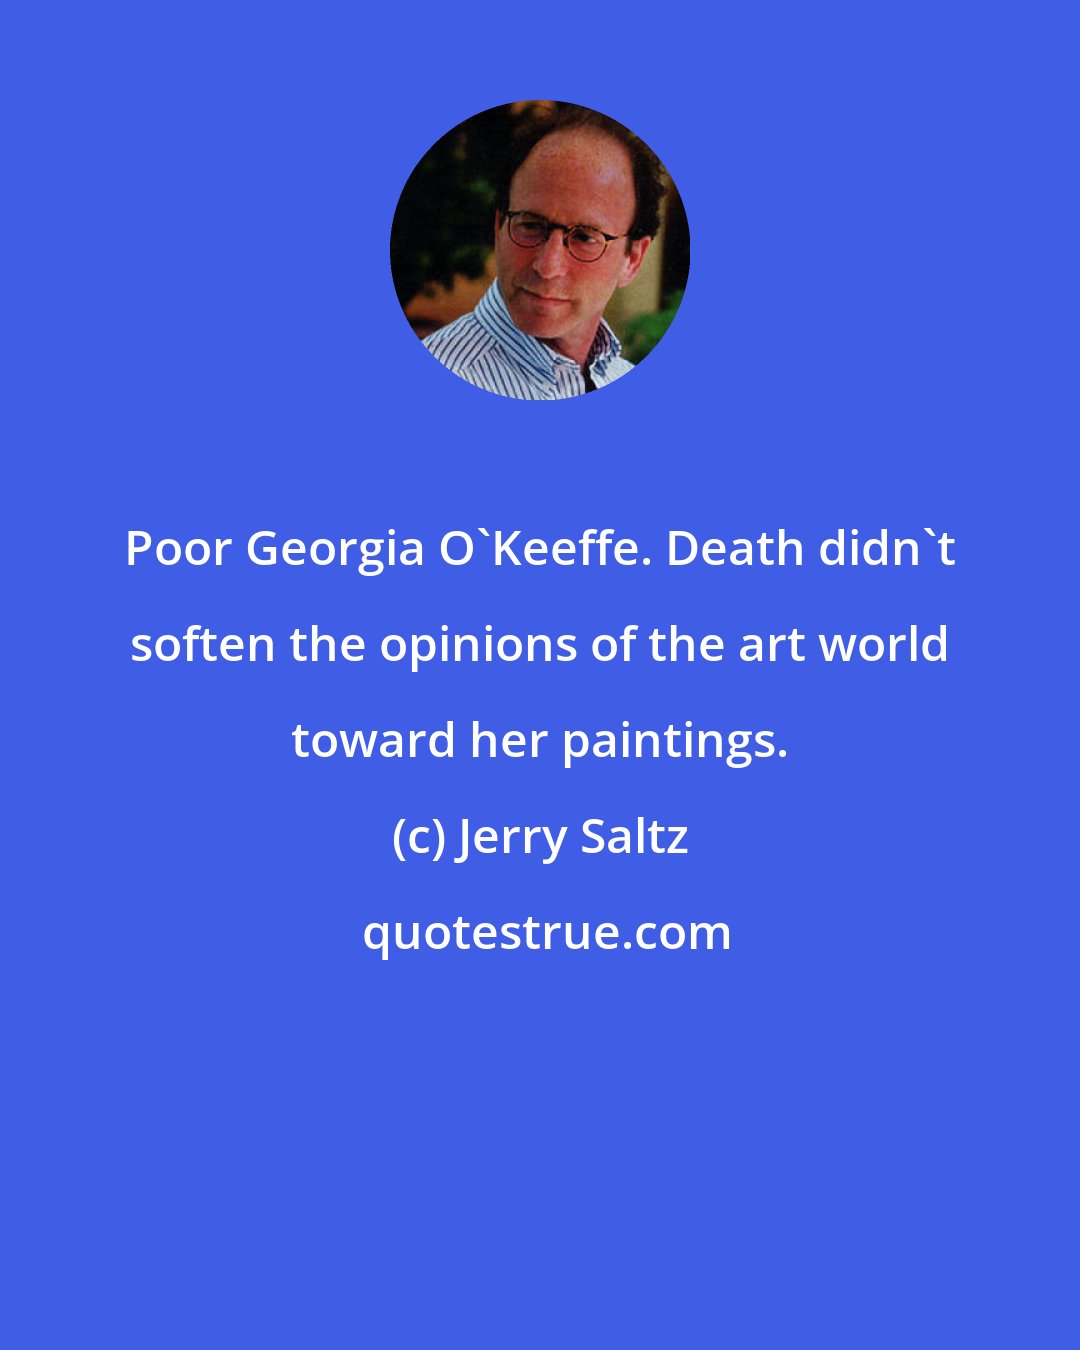 Jerry Saltz: Poor Georgia O'Keeffe. Death didn't soften the opinions of the art world toward her paintings.